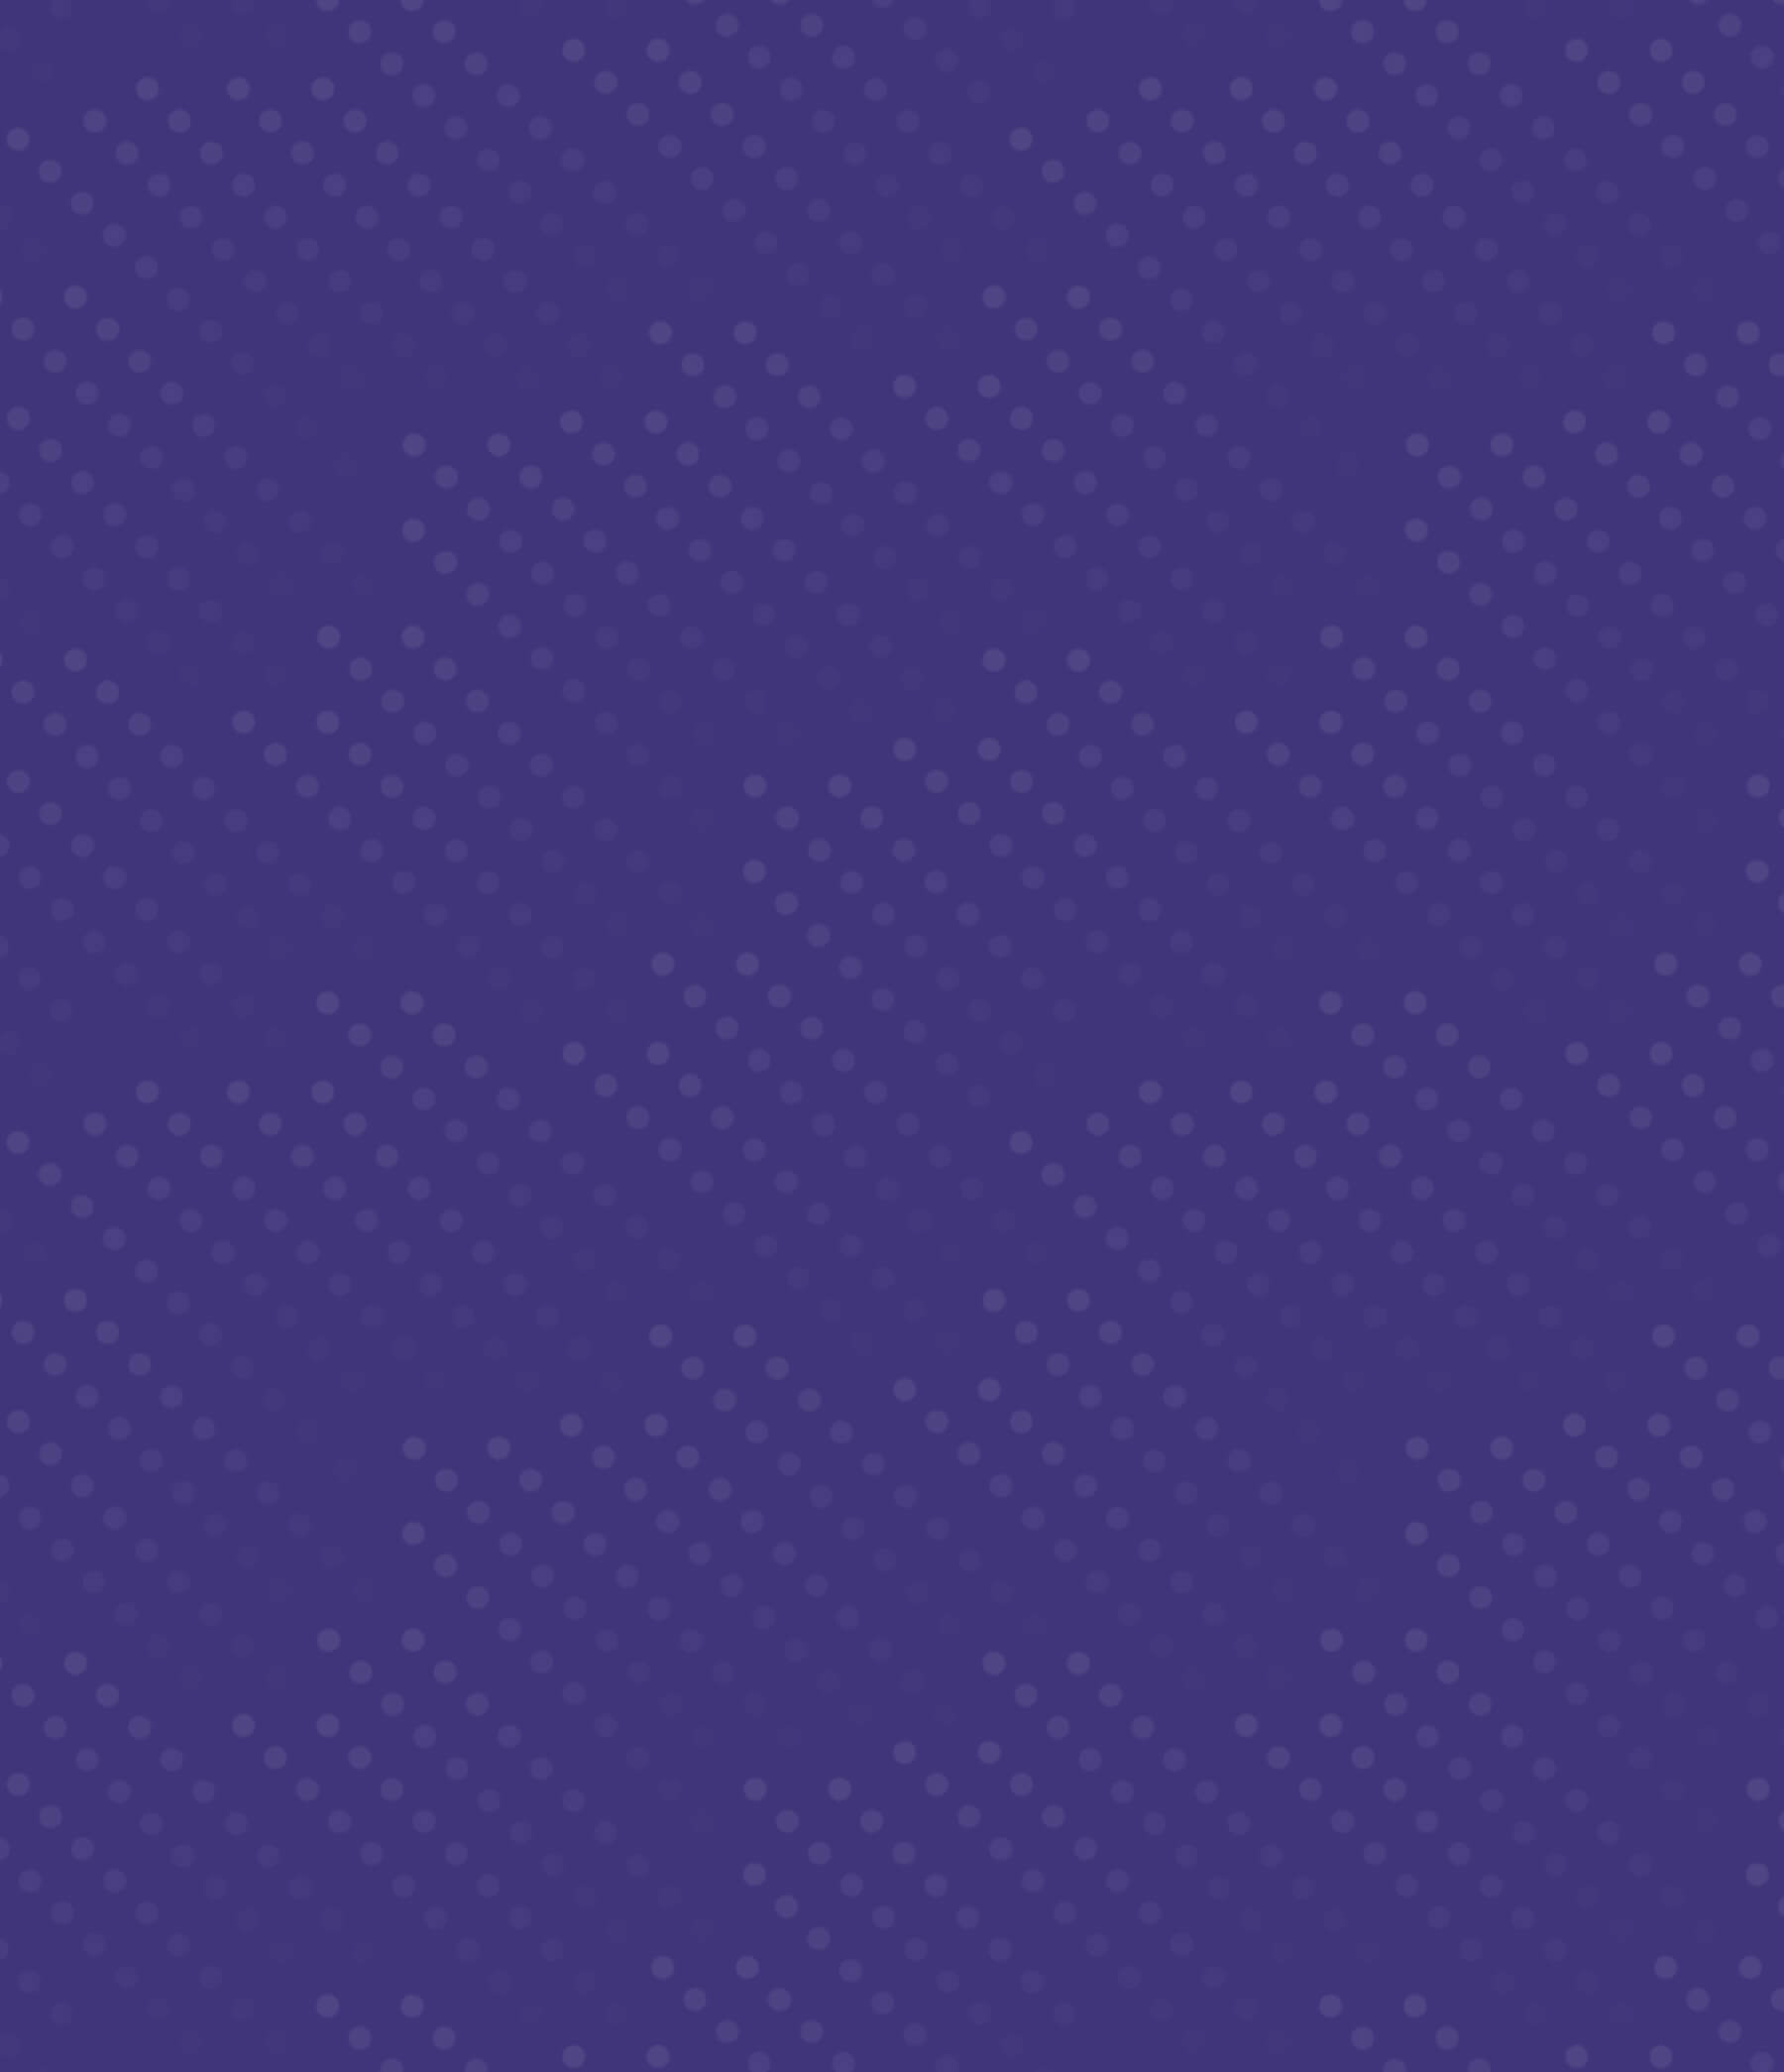 Purple background with dot pattern on top.